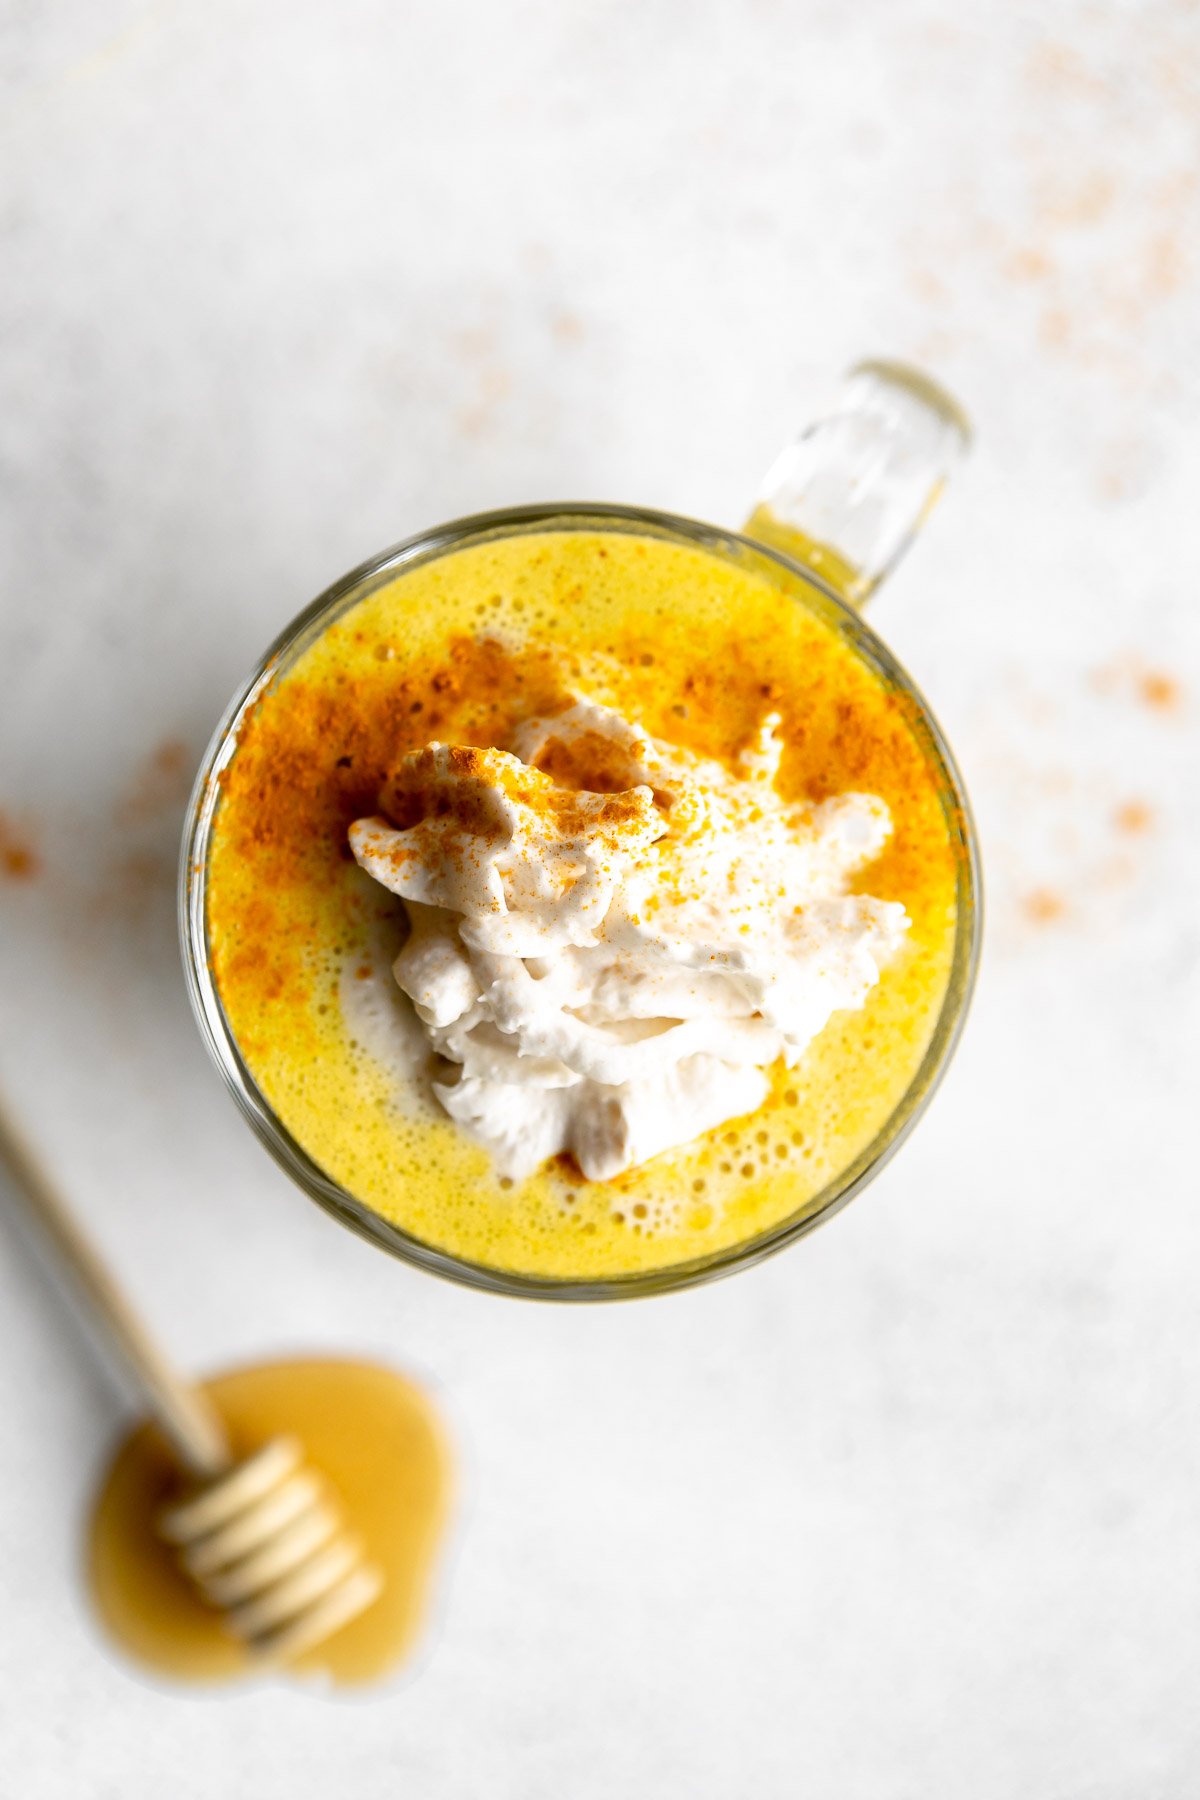 golden milk turmeric latte with whipped cream on top